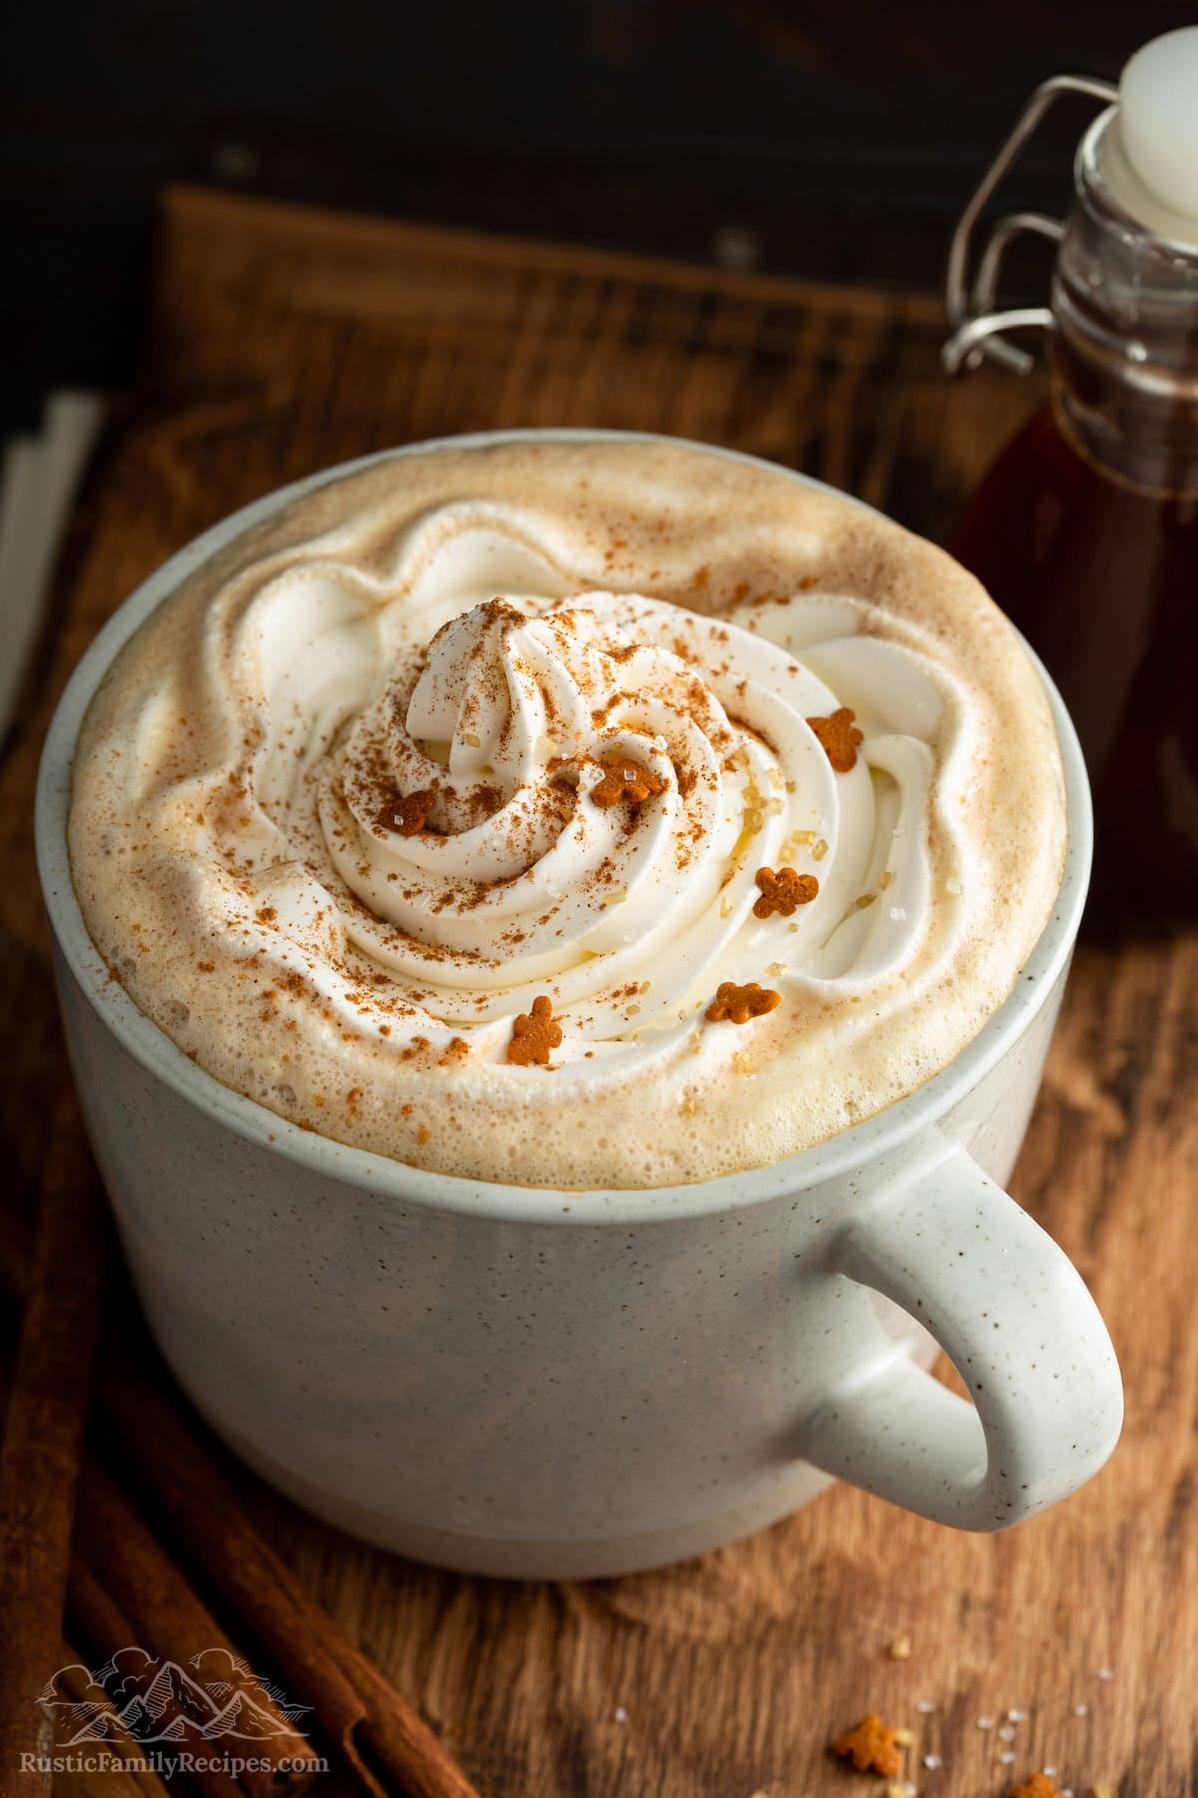  Sip it slow, savor the gingerbread goodness!